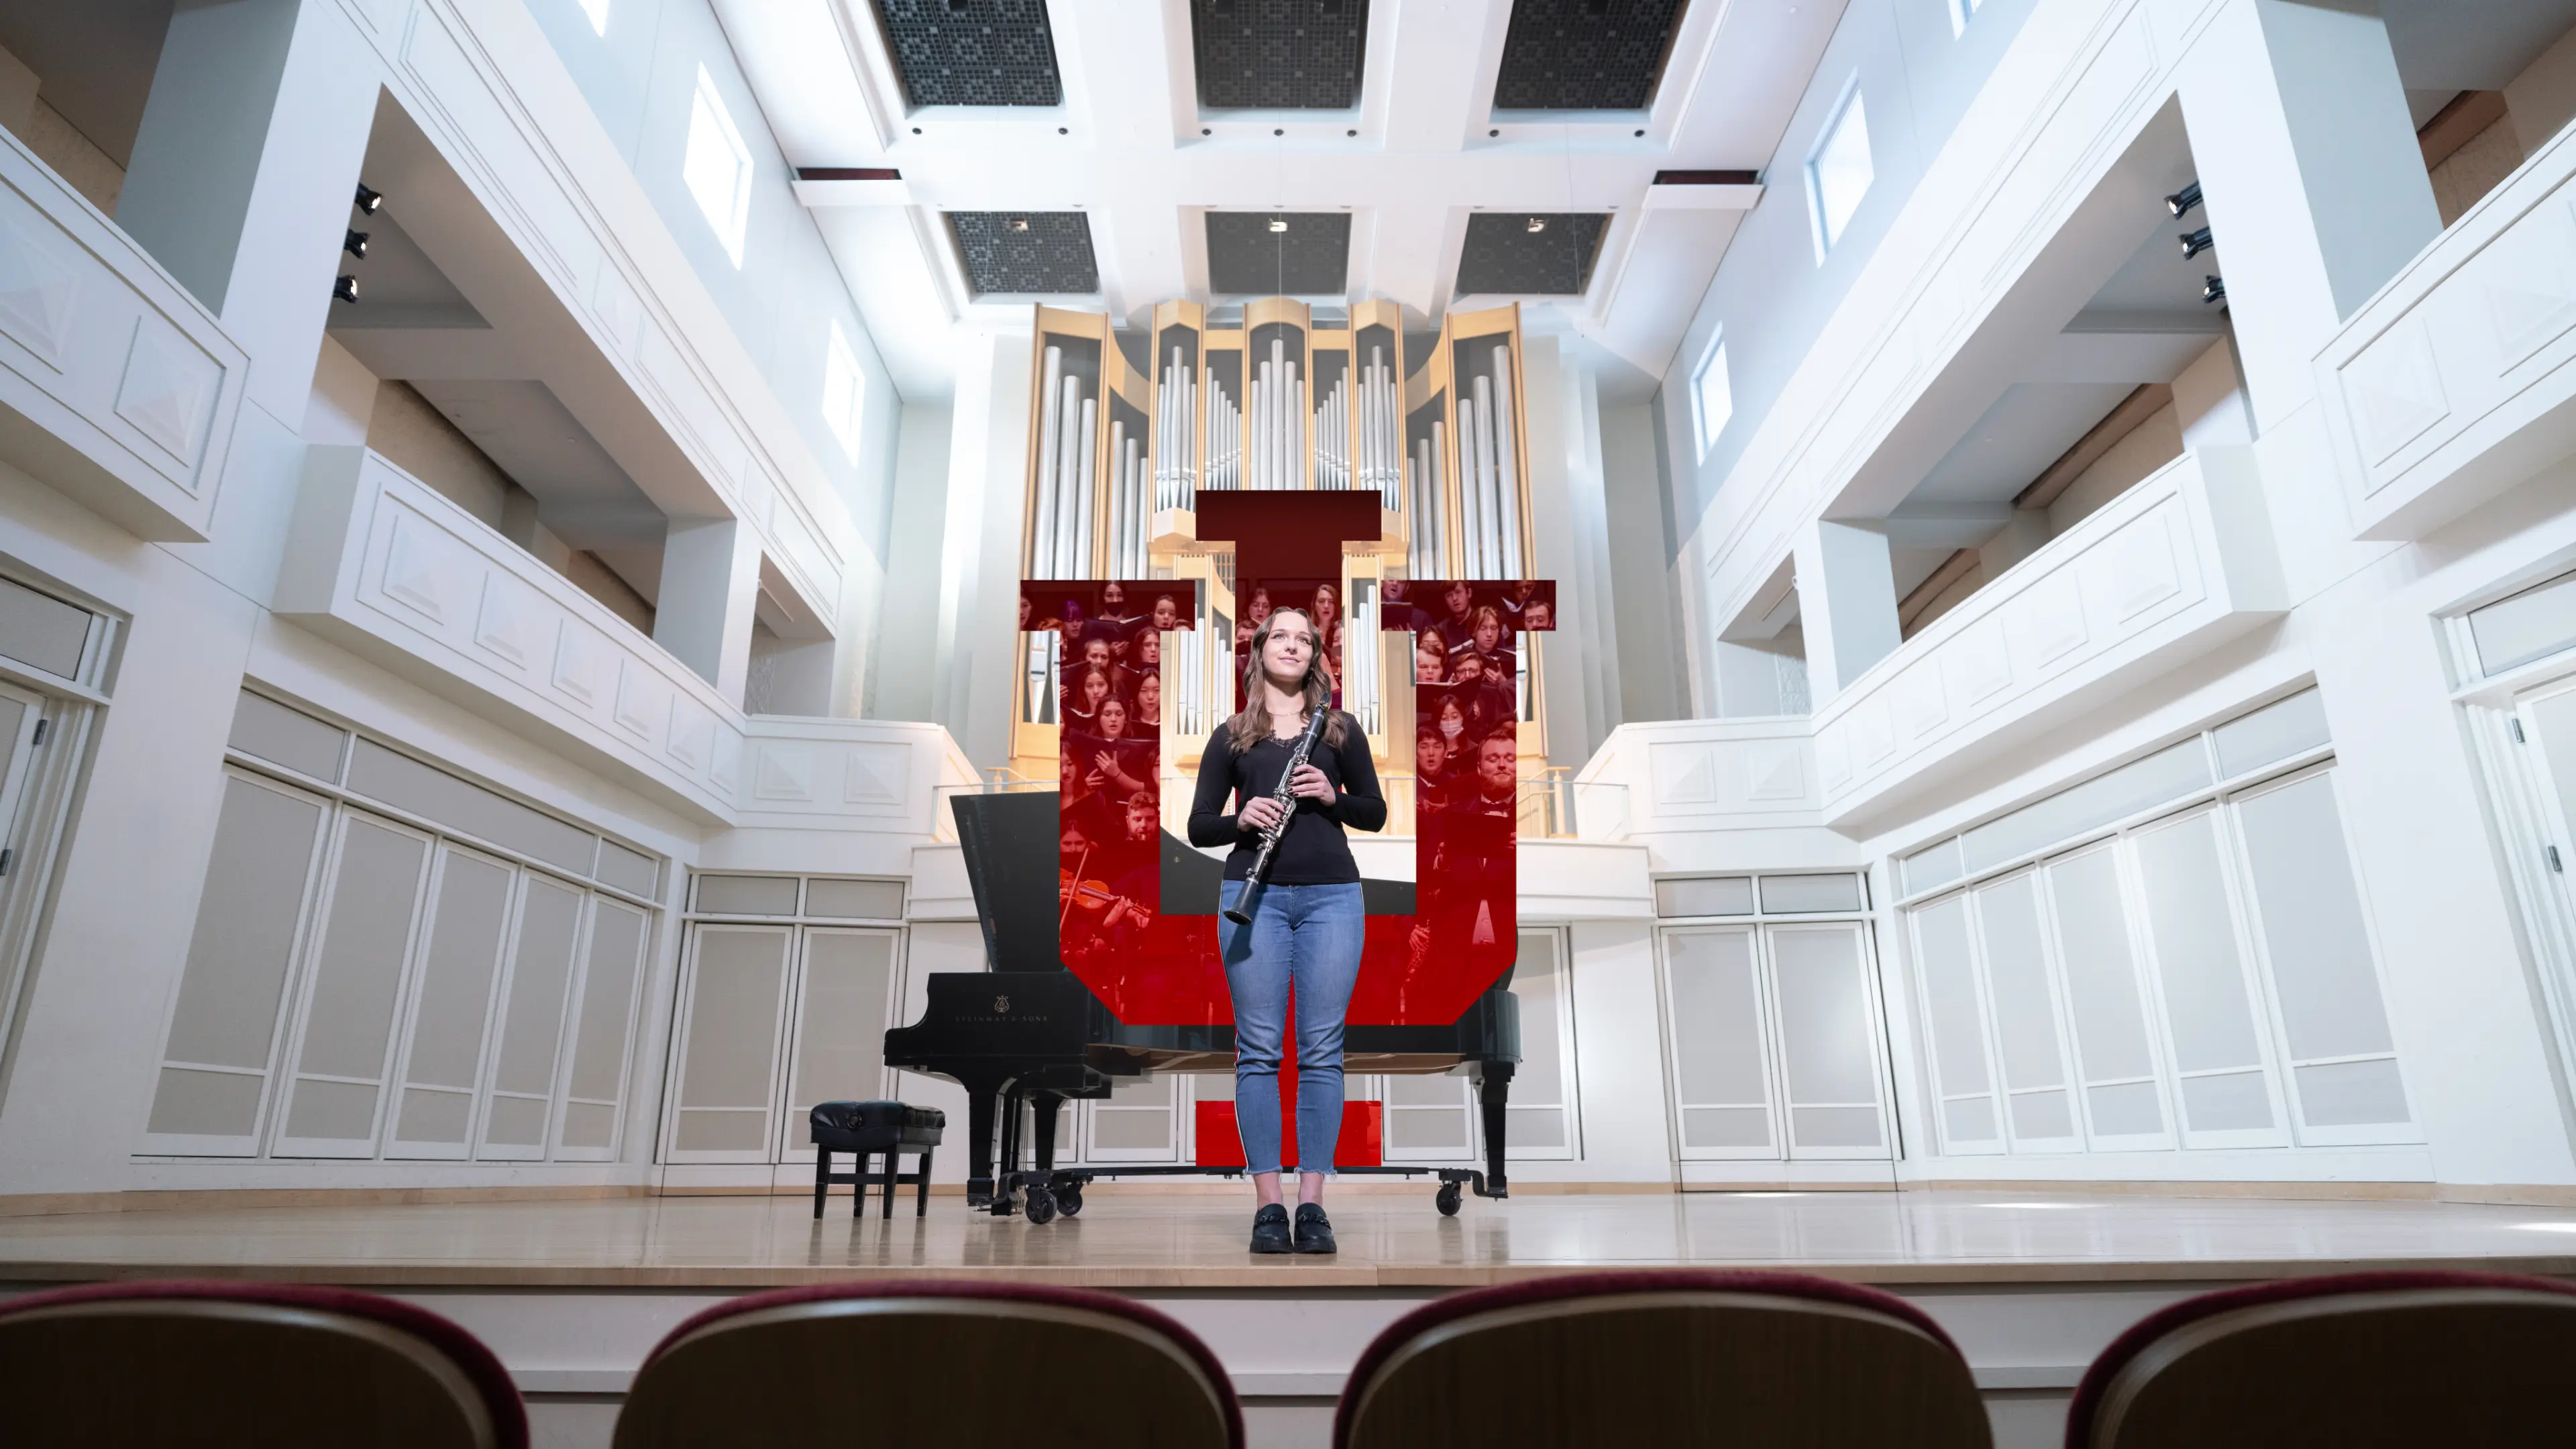 A female student stands centerstage holding a clarinet, she looks out to the performance hall in front of her. Behind her an IU trident shows a full symphony playing.